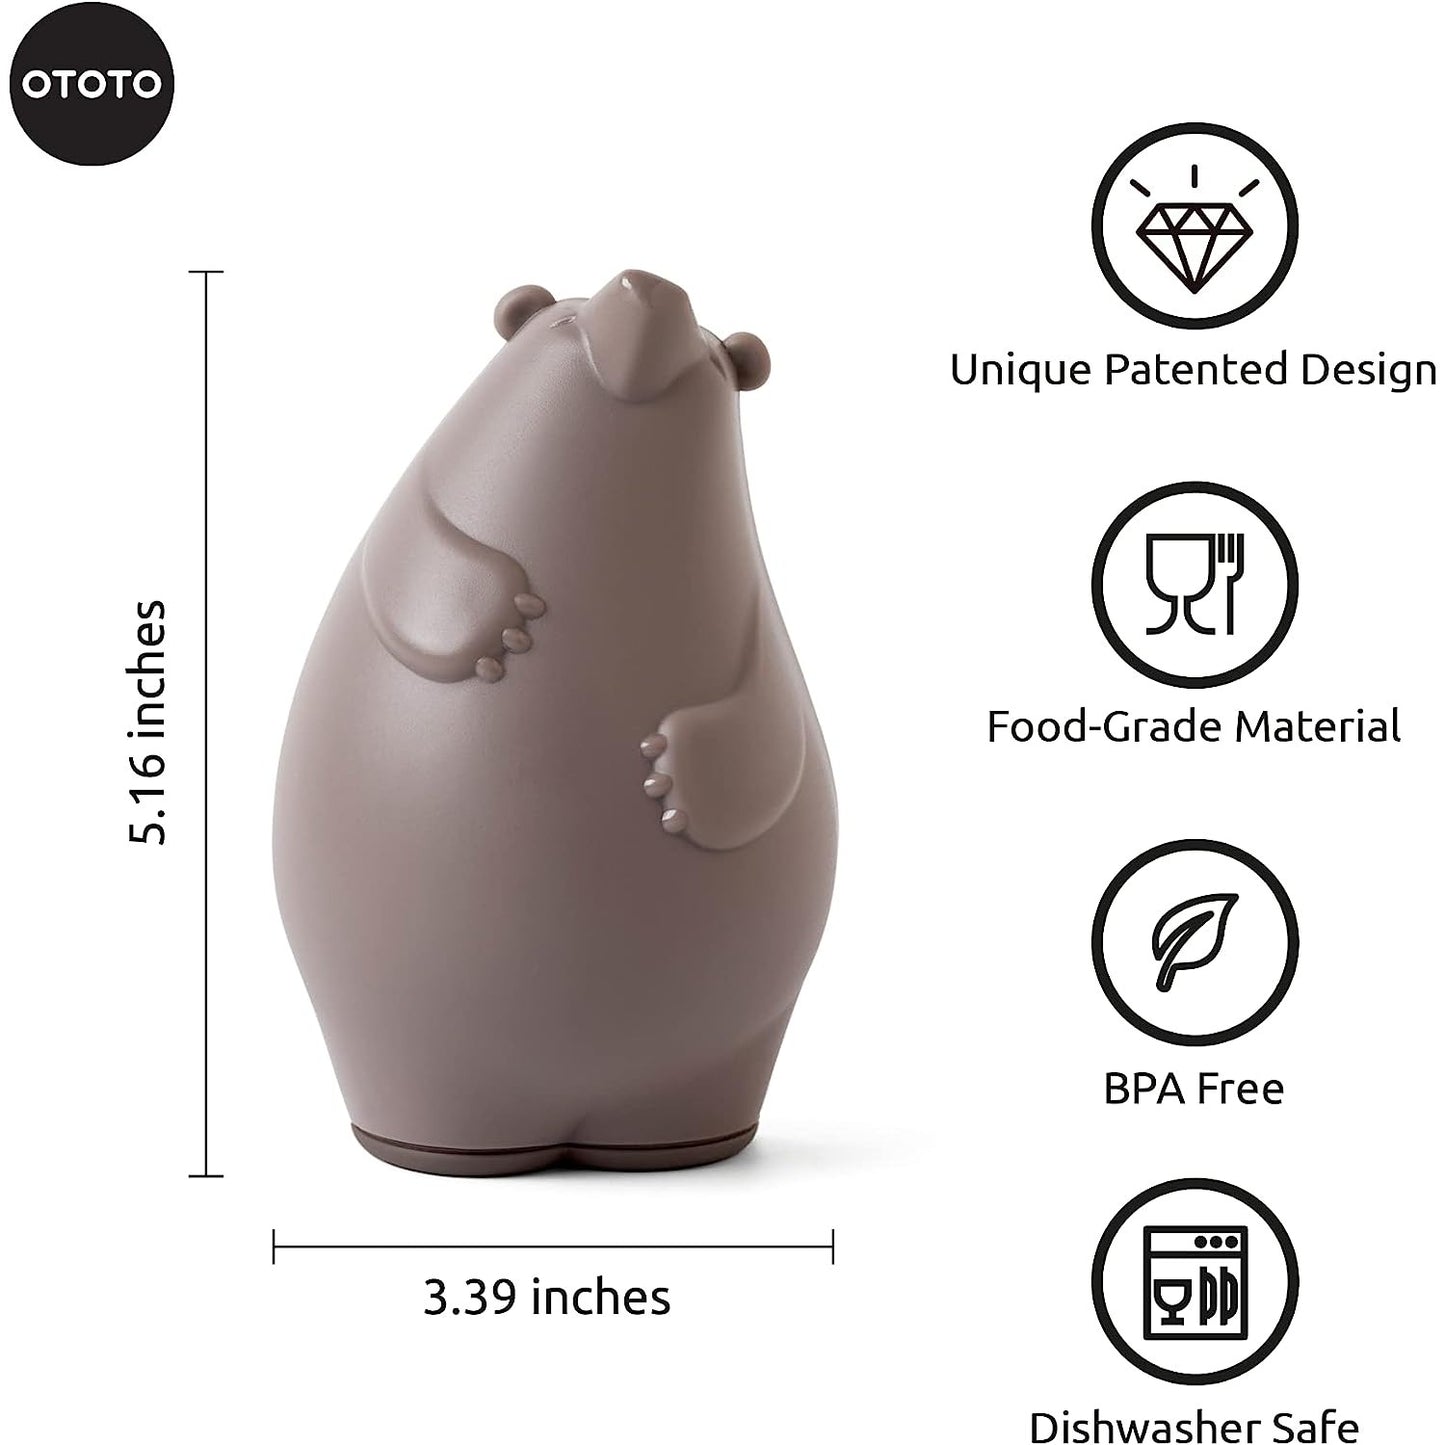 Size measurements for a kitchen grater shaped like a brown bear. 5.16 inches in height x 3.39 inches in width.